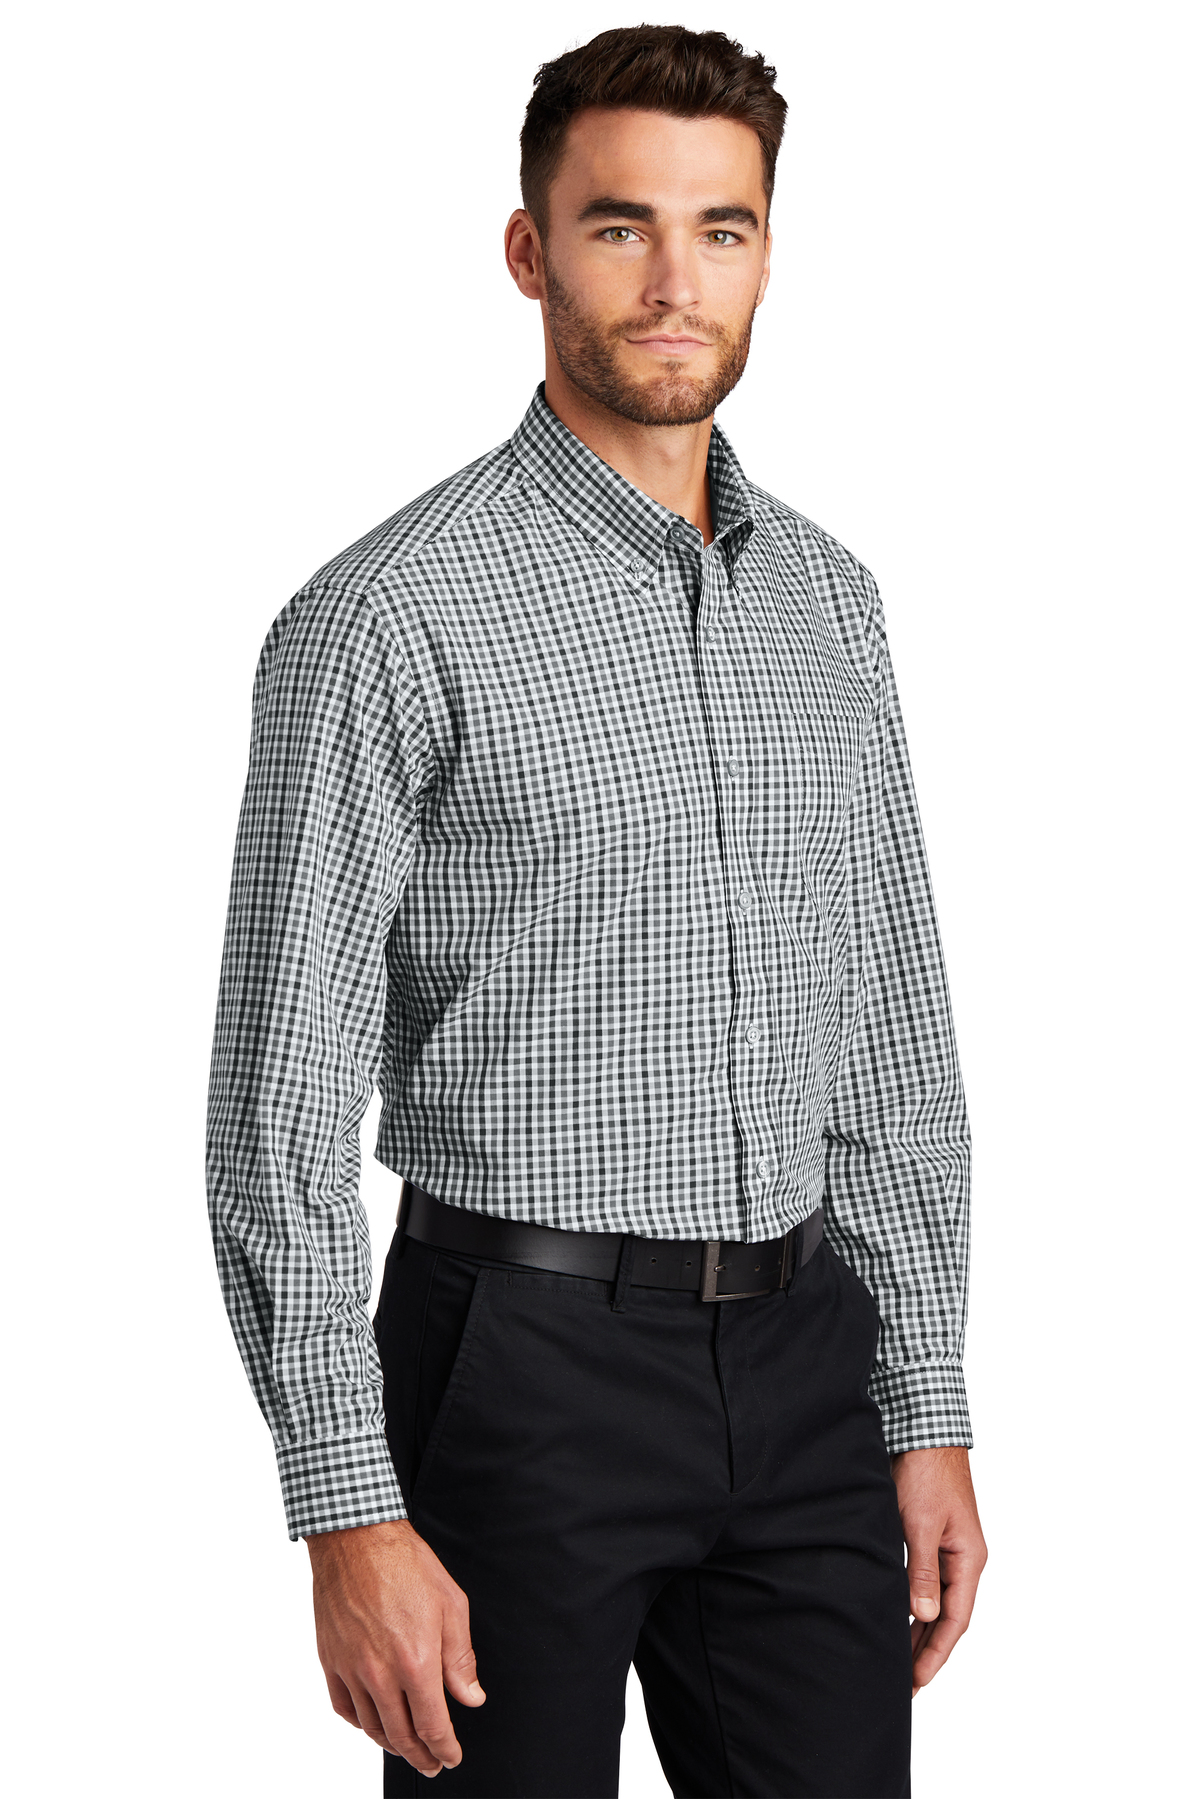 Blue/Purple Port Authority Long Sleeve Gingham Easy Care Shirt S 